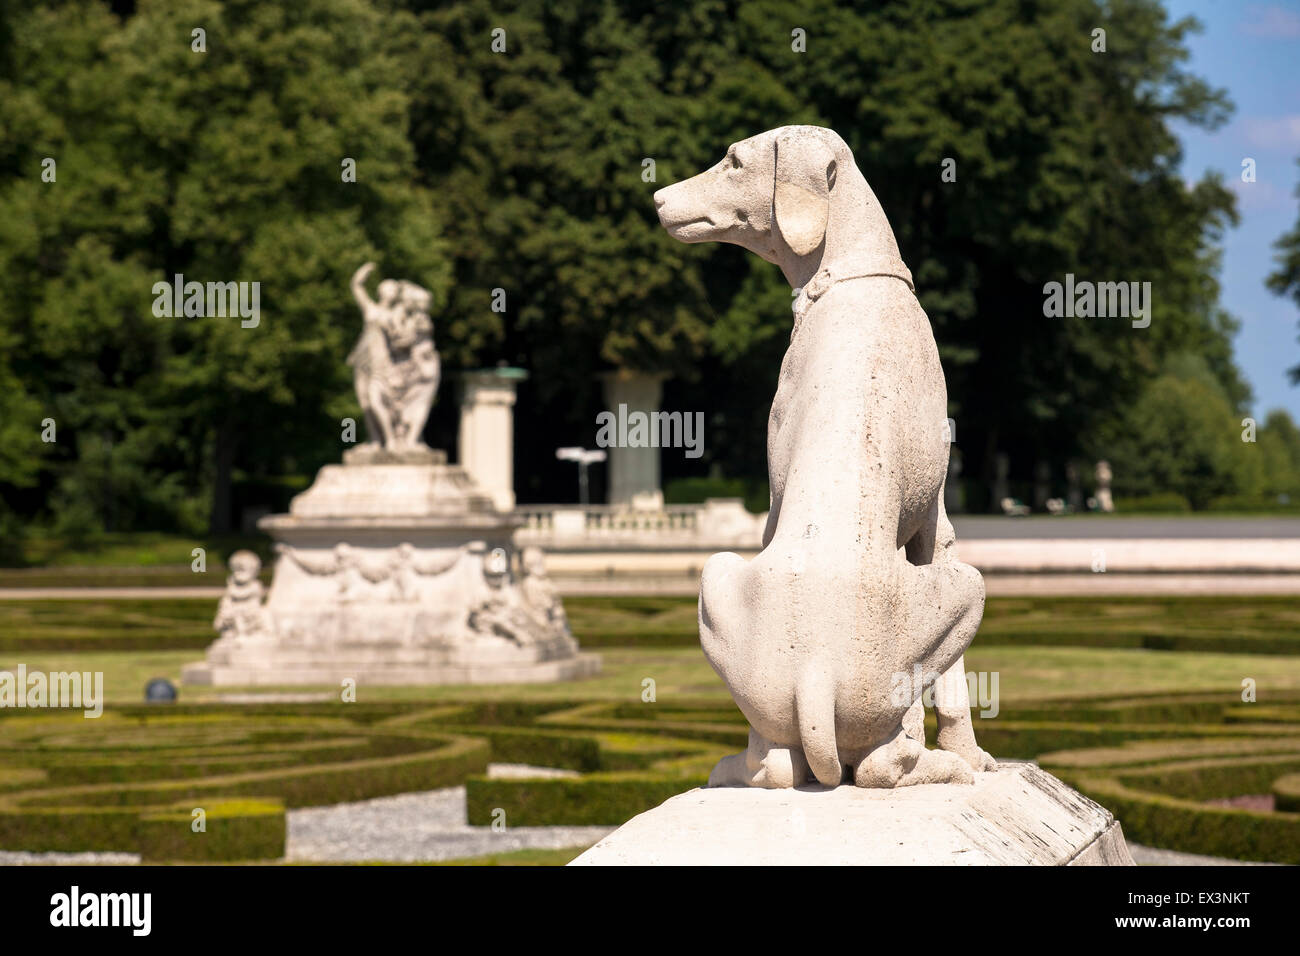 Europe, Germany, North Rhine-Westphalia, statue of a dog in the grounds of castle Nordkirchen in the district of Coesfeld, this  Stock Photo